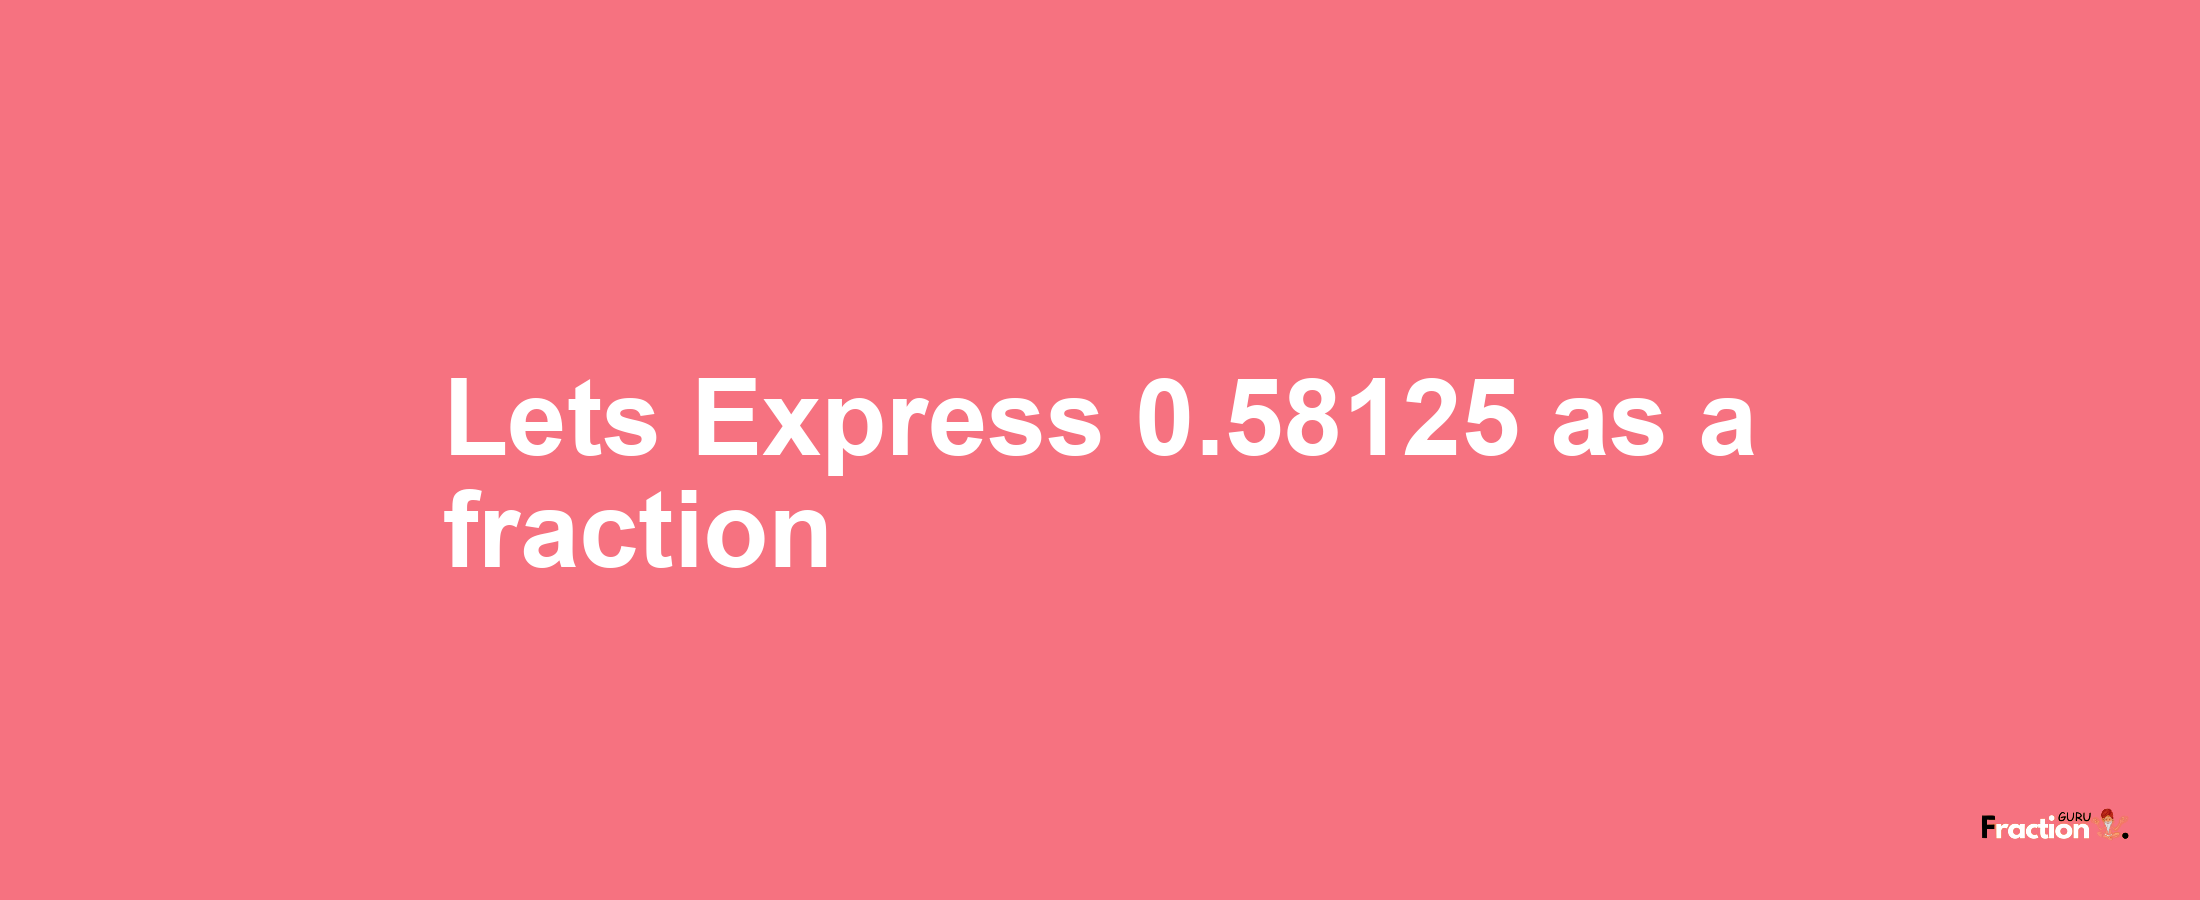 Lets Express 0.58125 as afraction